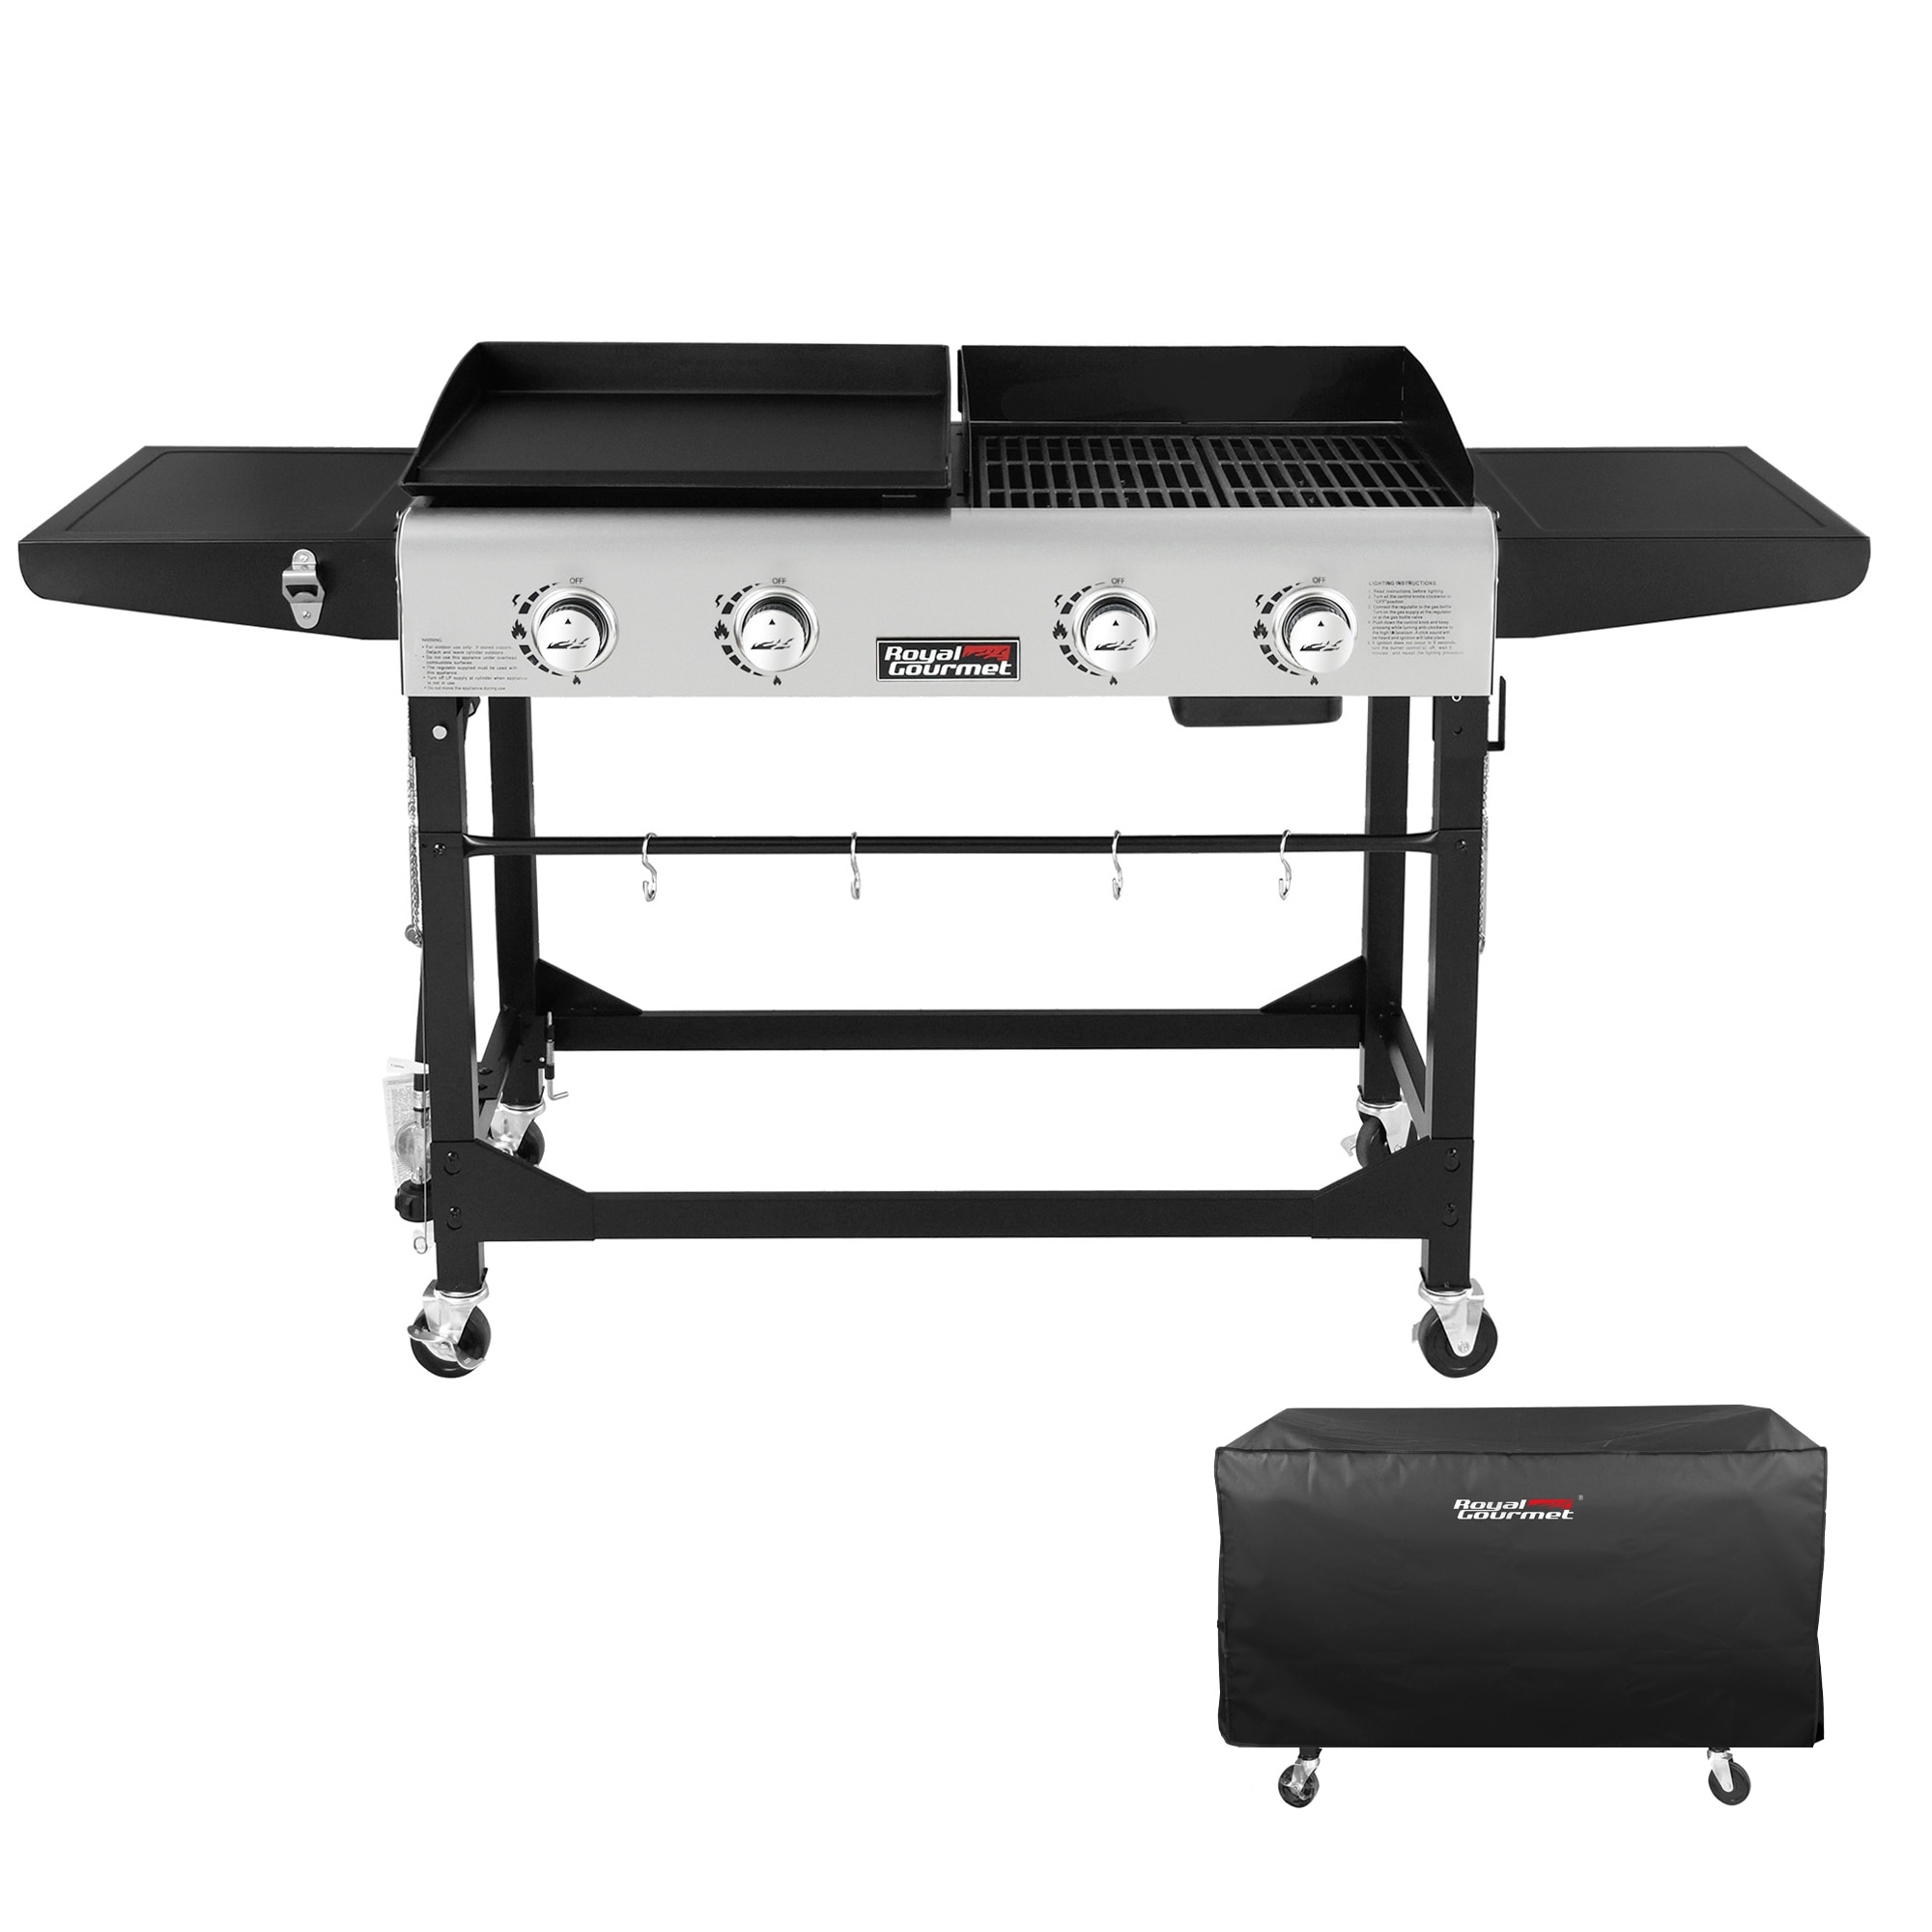 Royal Gourmet 4-burner Portable Flat Top Gas Grill And Griddle Combo With Folding Legs  With Cover black and Silver